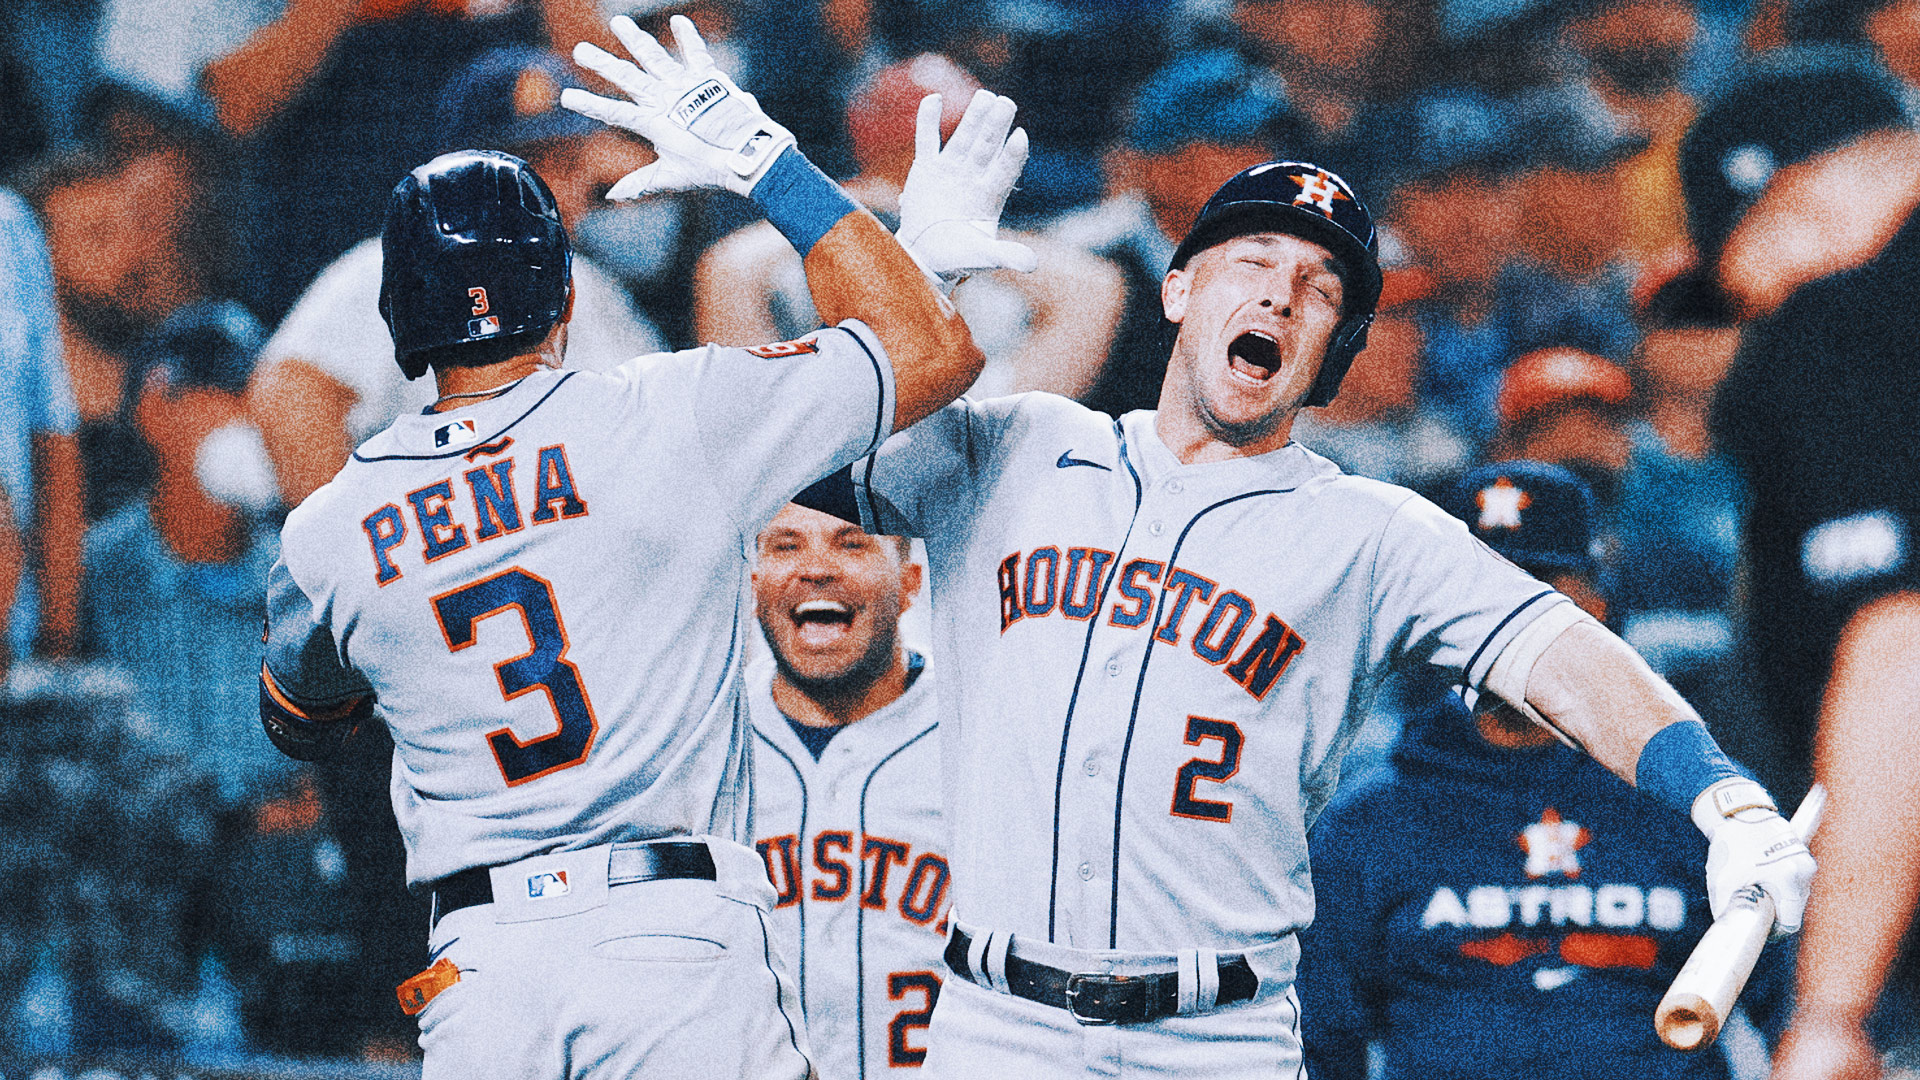 Highlights and runs: Houston Astros 8-3 Seattle Mariners in MLB